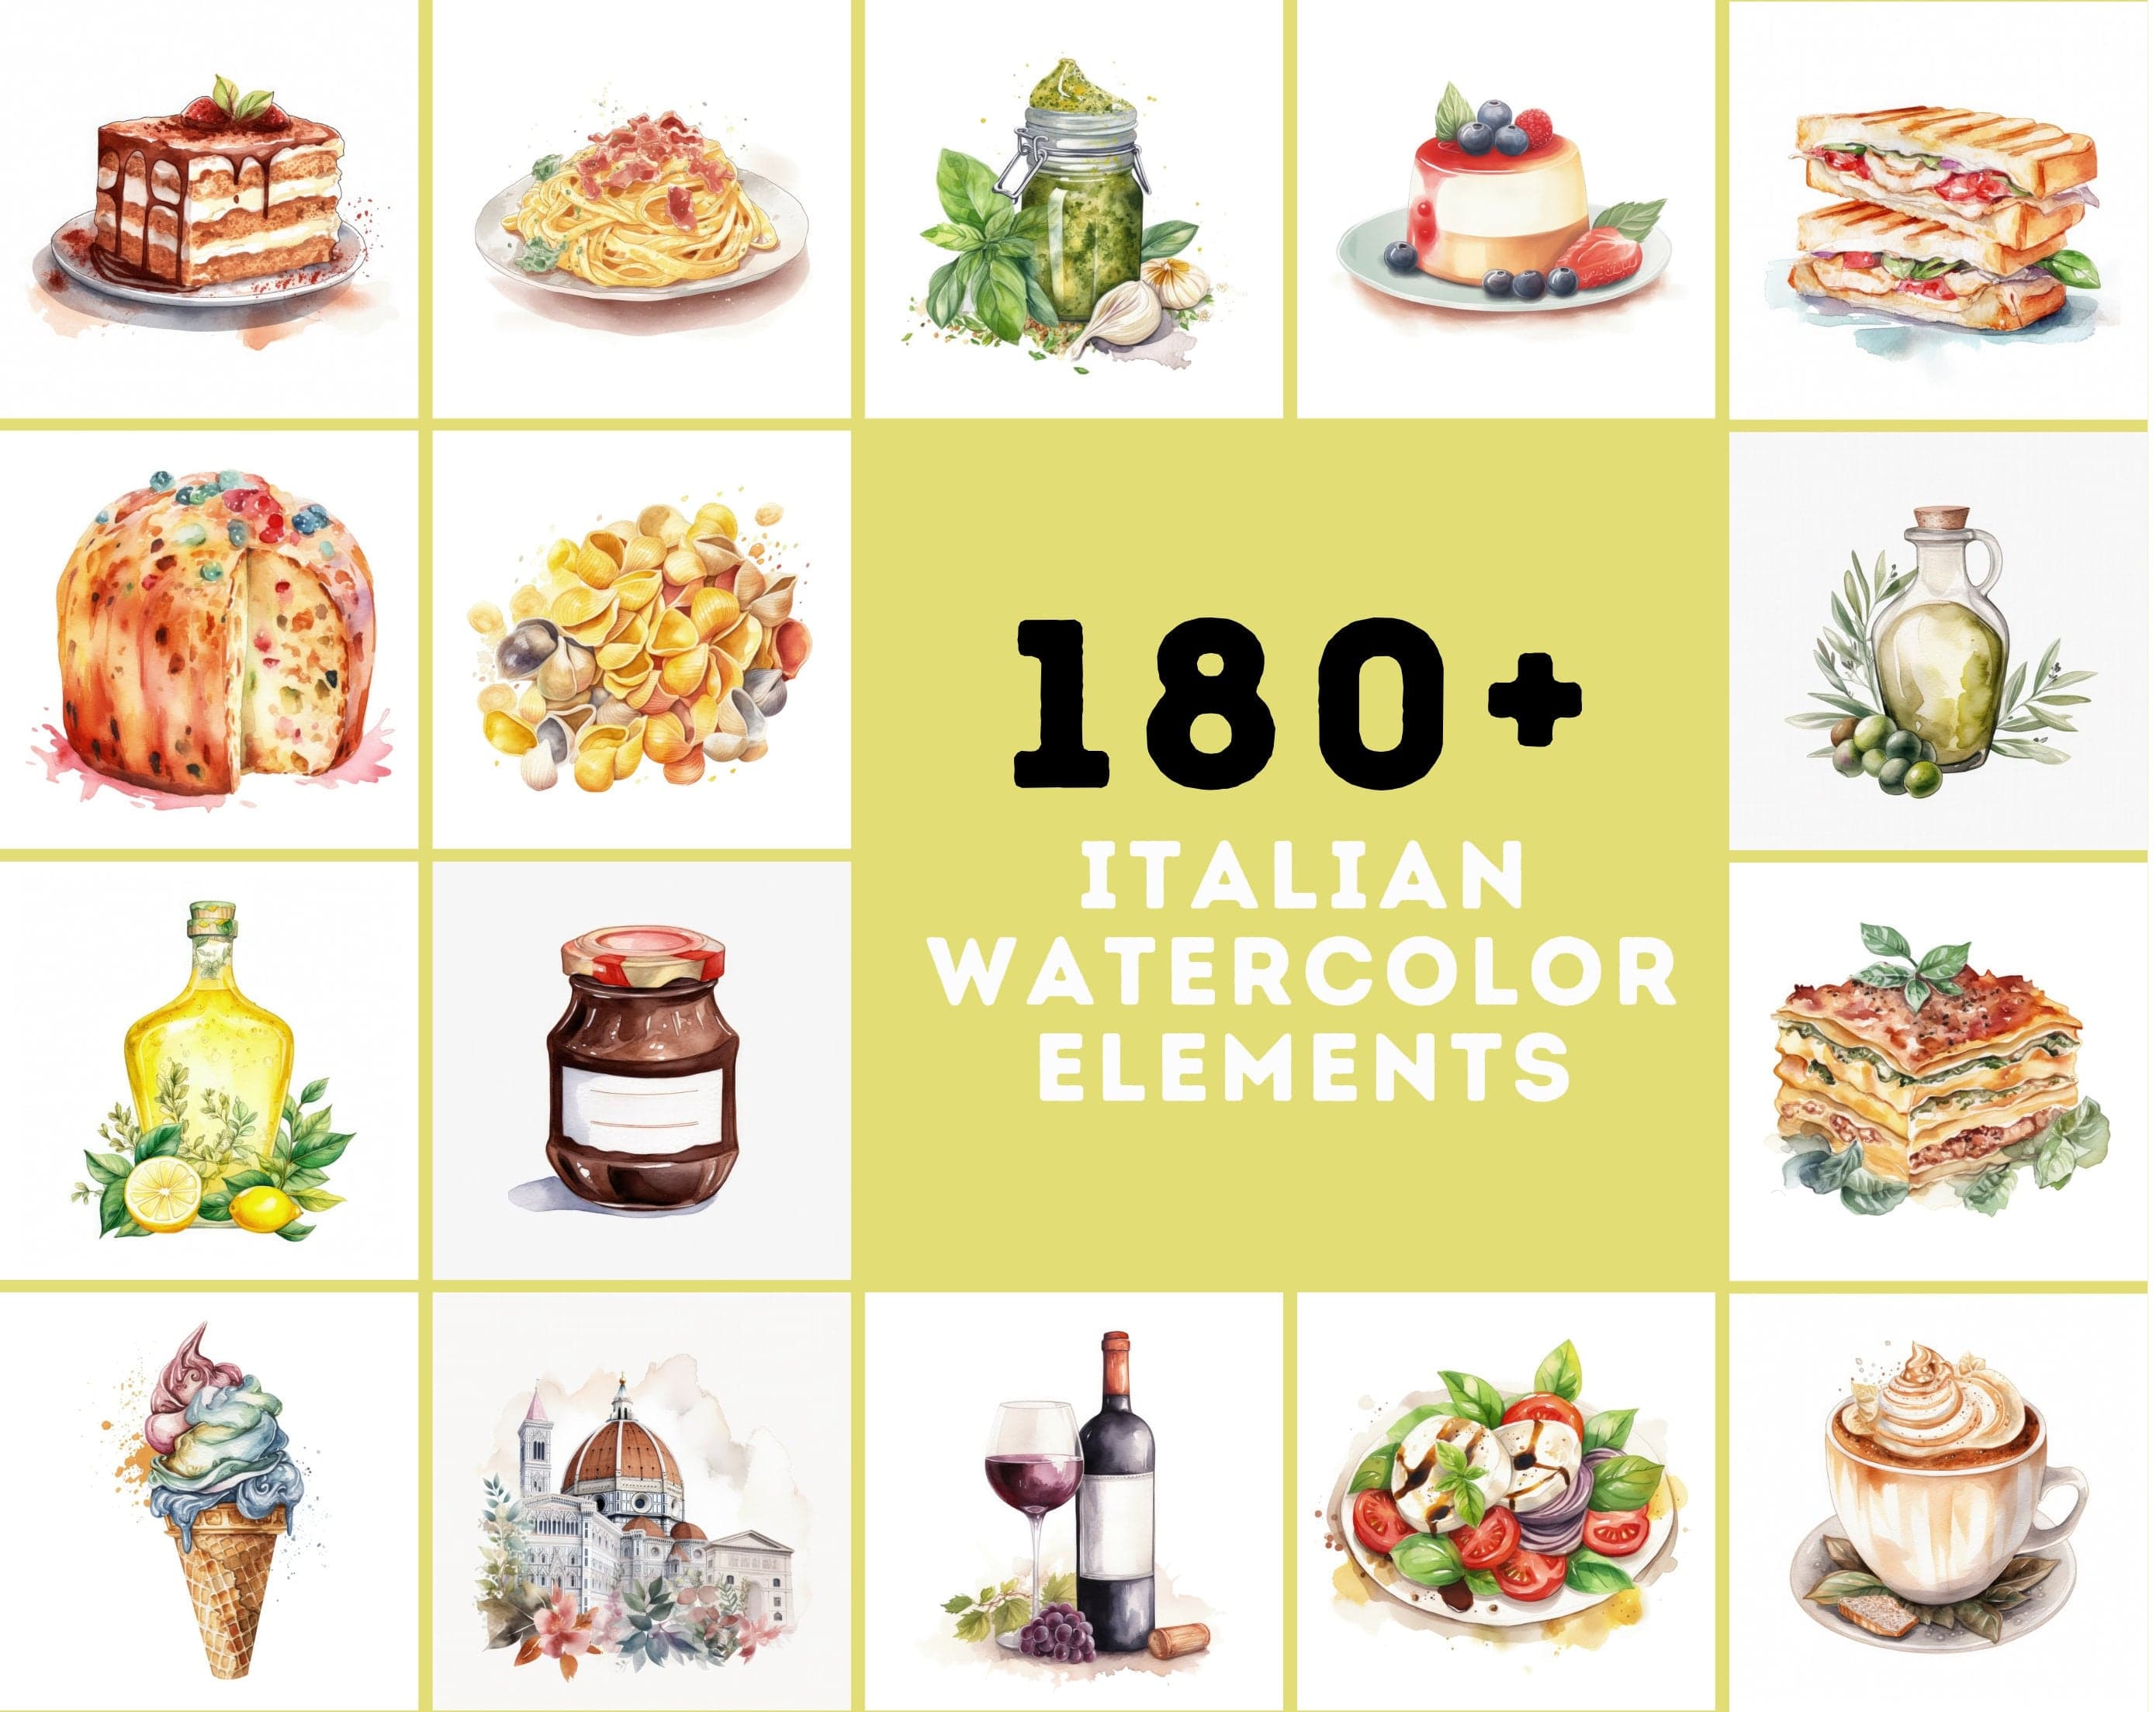 Italian Watercolor Elements, 180 High-Resolution Images with Commercial License Digital Download Sumobundle